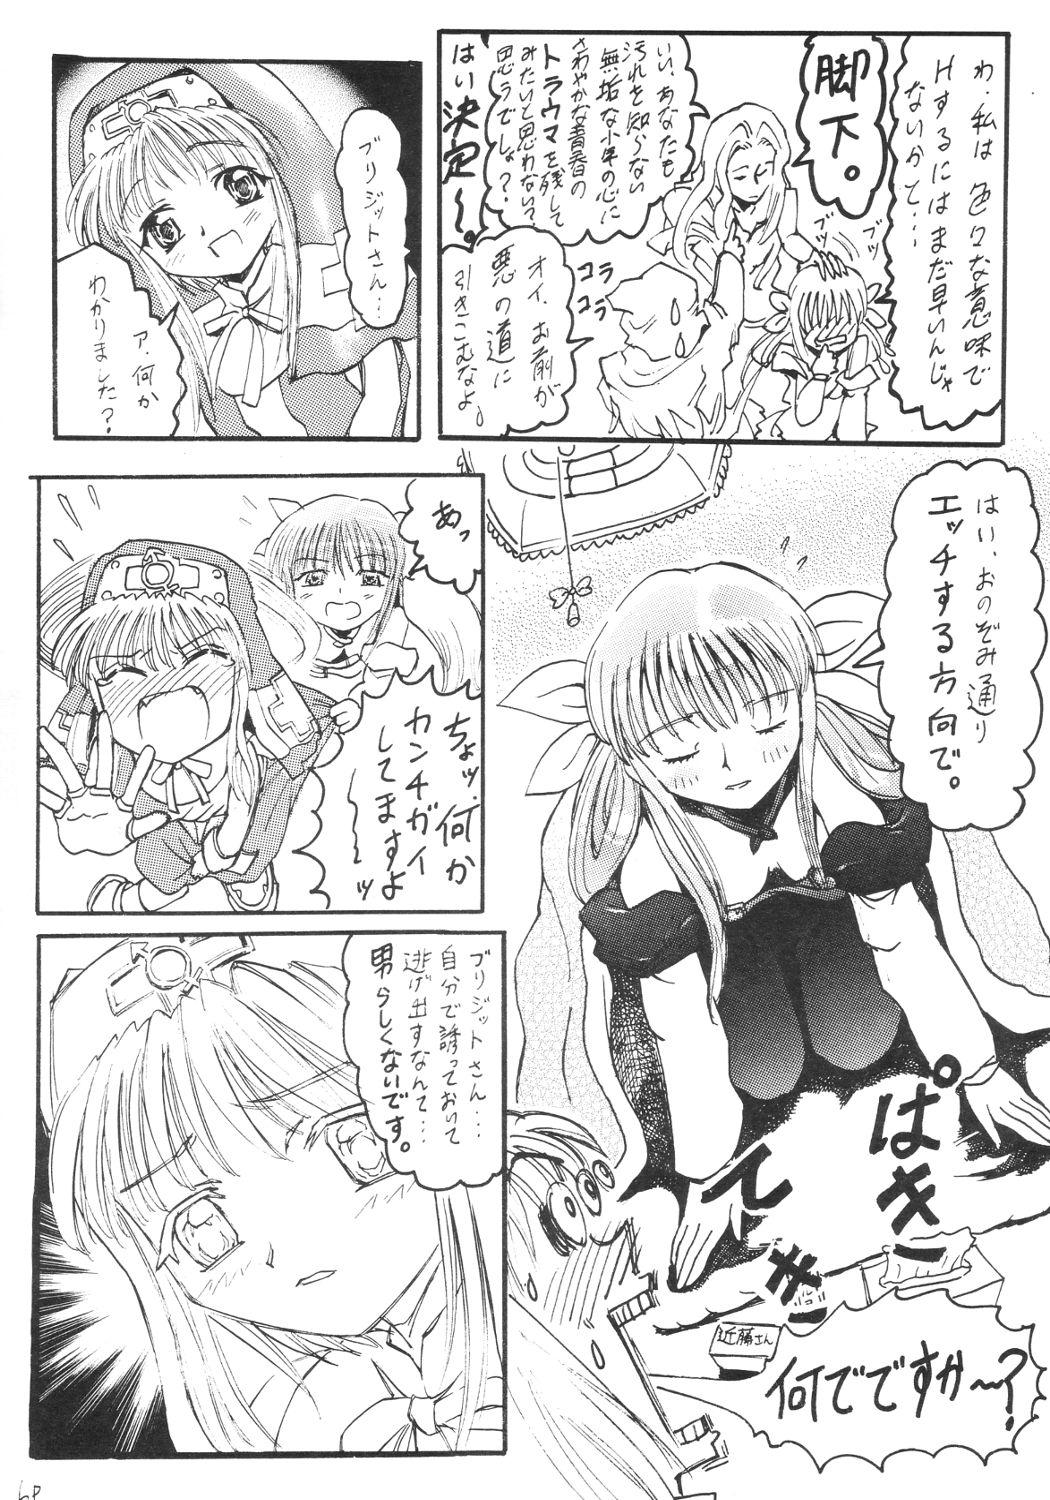 Innocent Anime Imouto Ou 2 - Guilty gear Transgender - Page 7